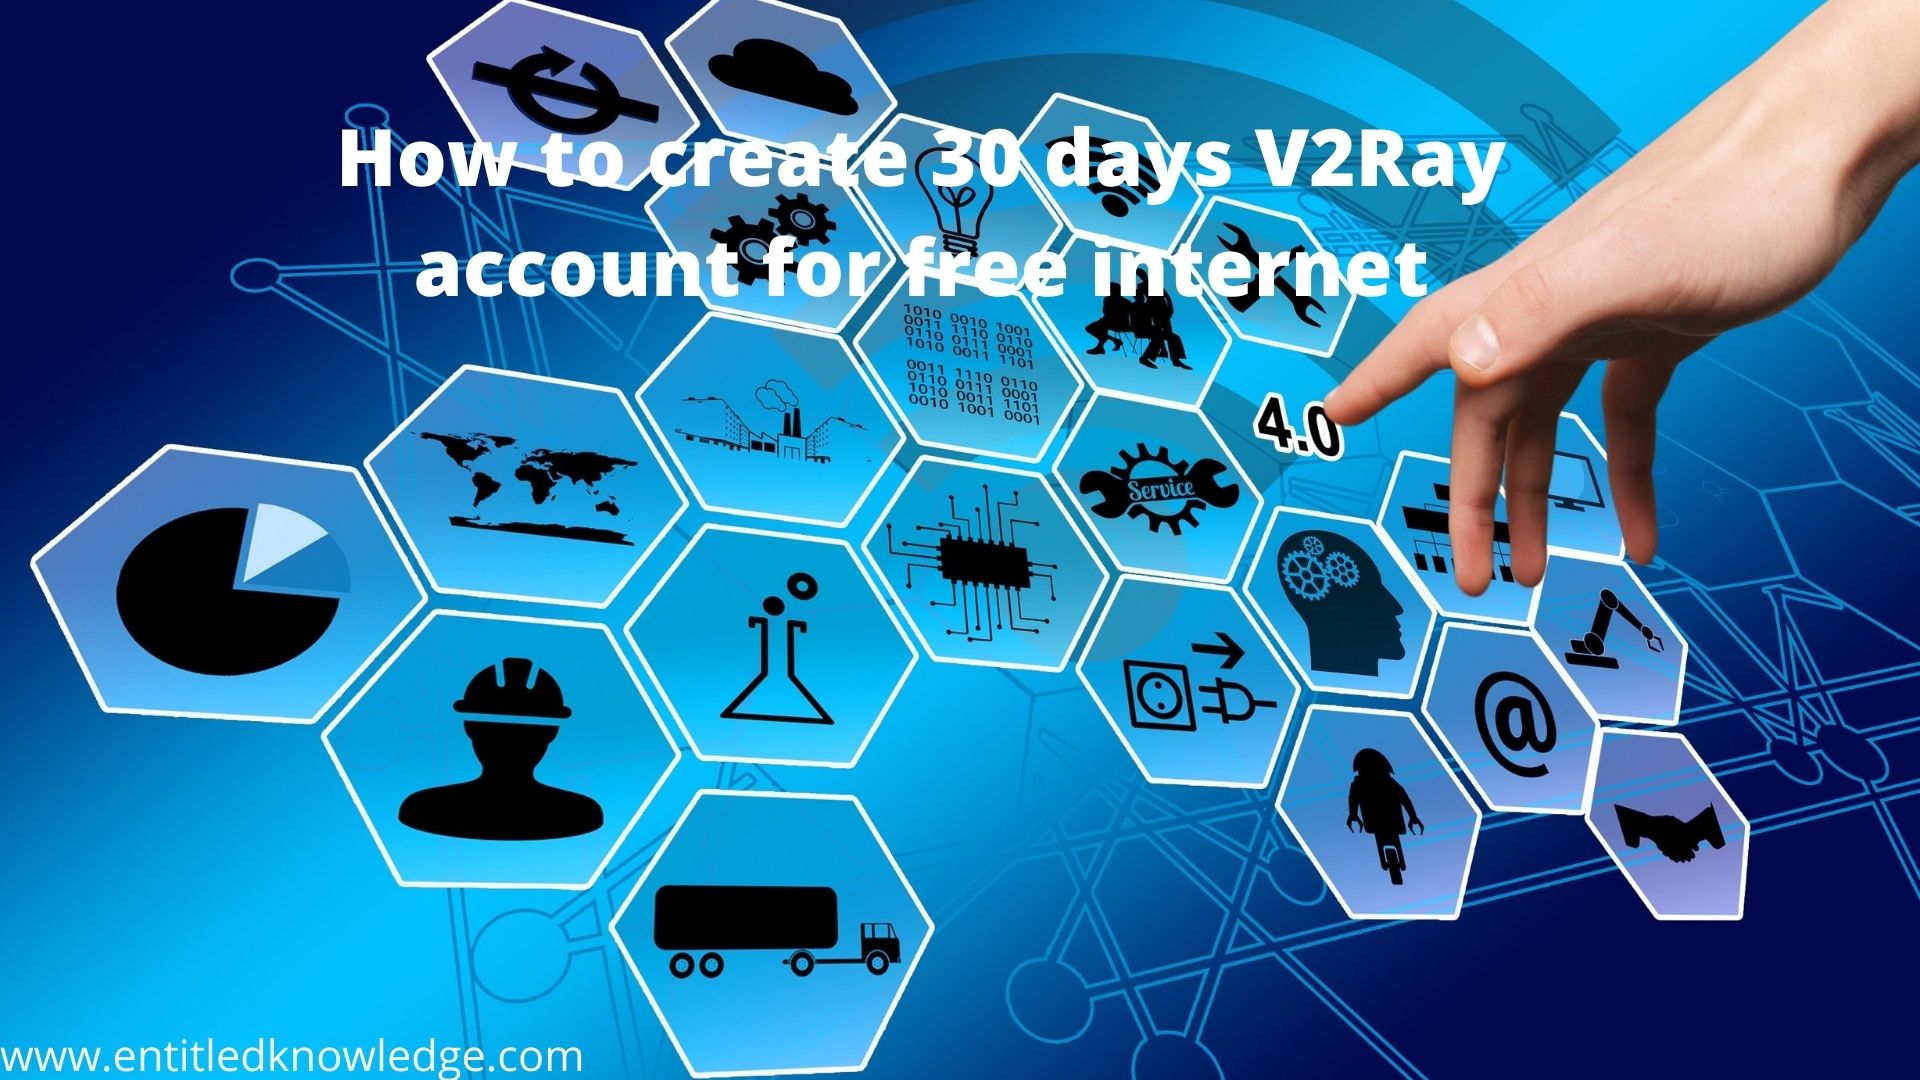 How to create 30 days V2Ray account for free internet